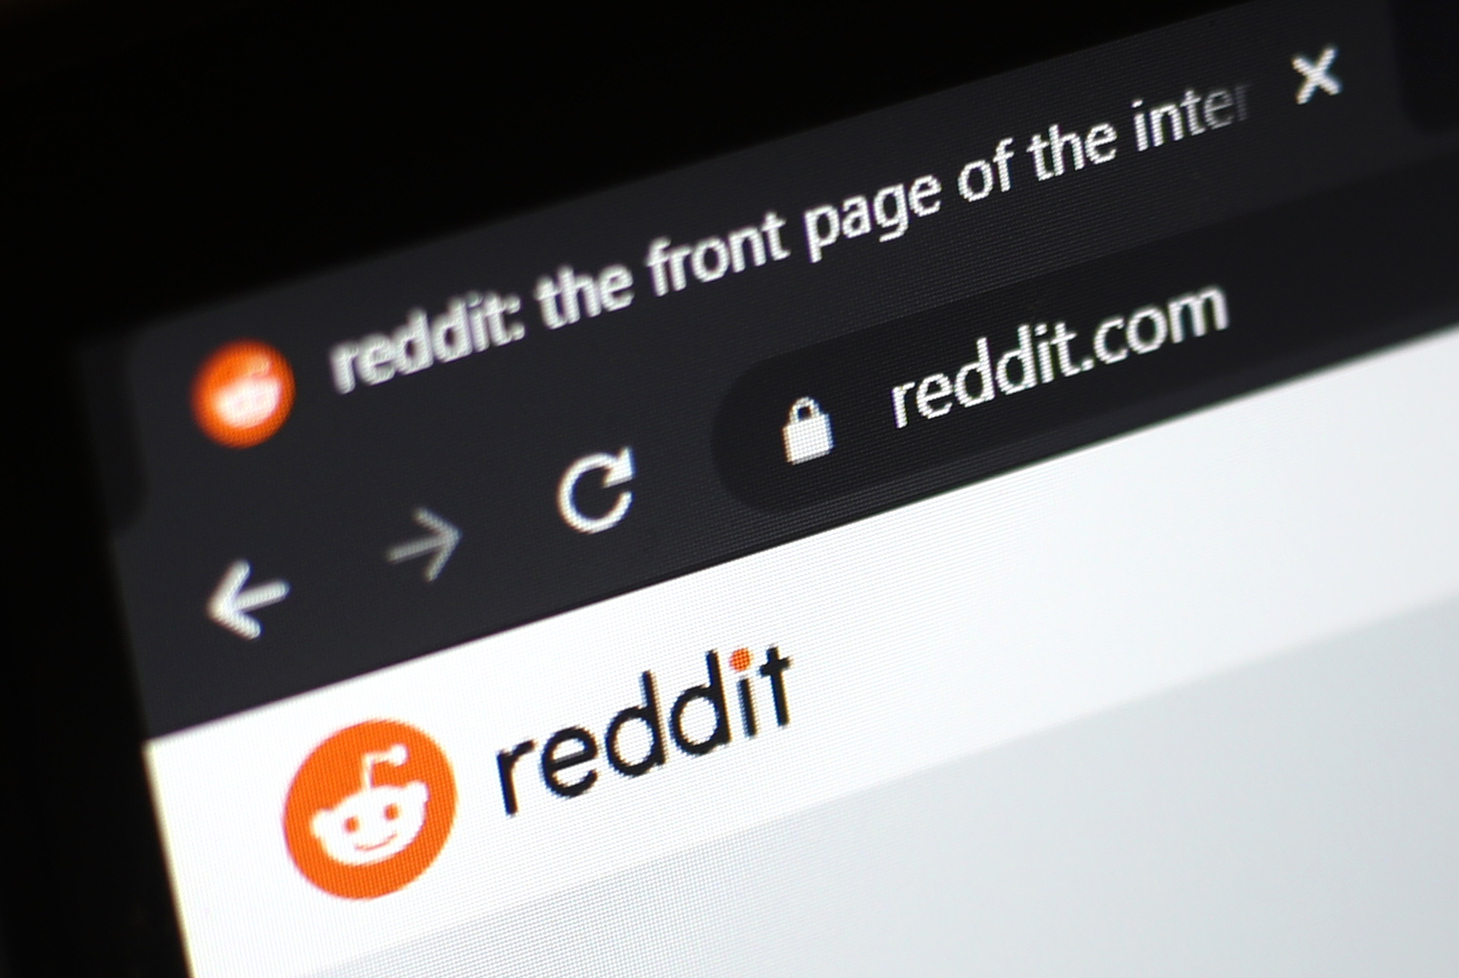 Custom feeds and other tricks to make you a better Redditor